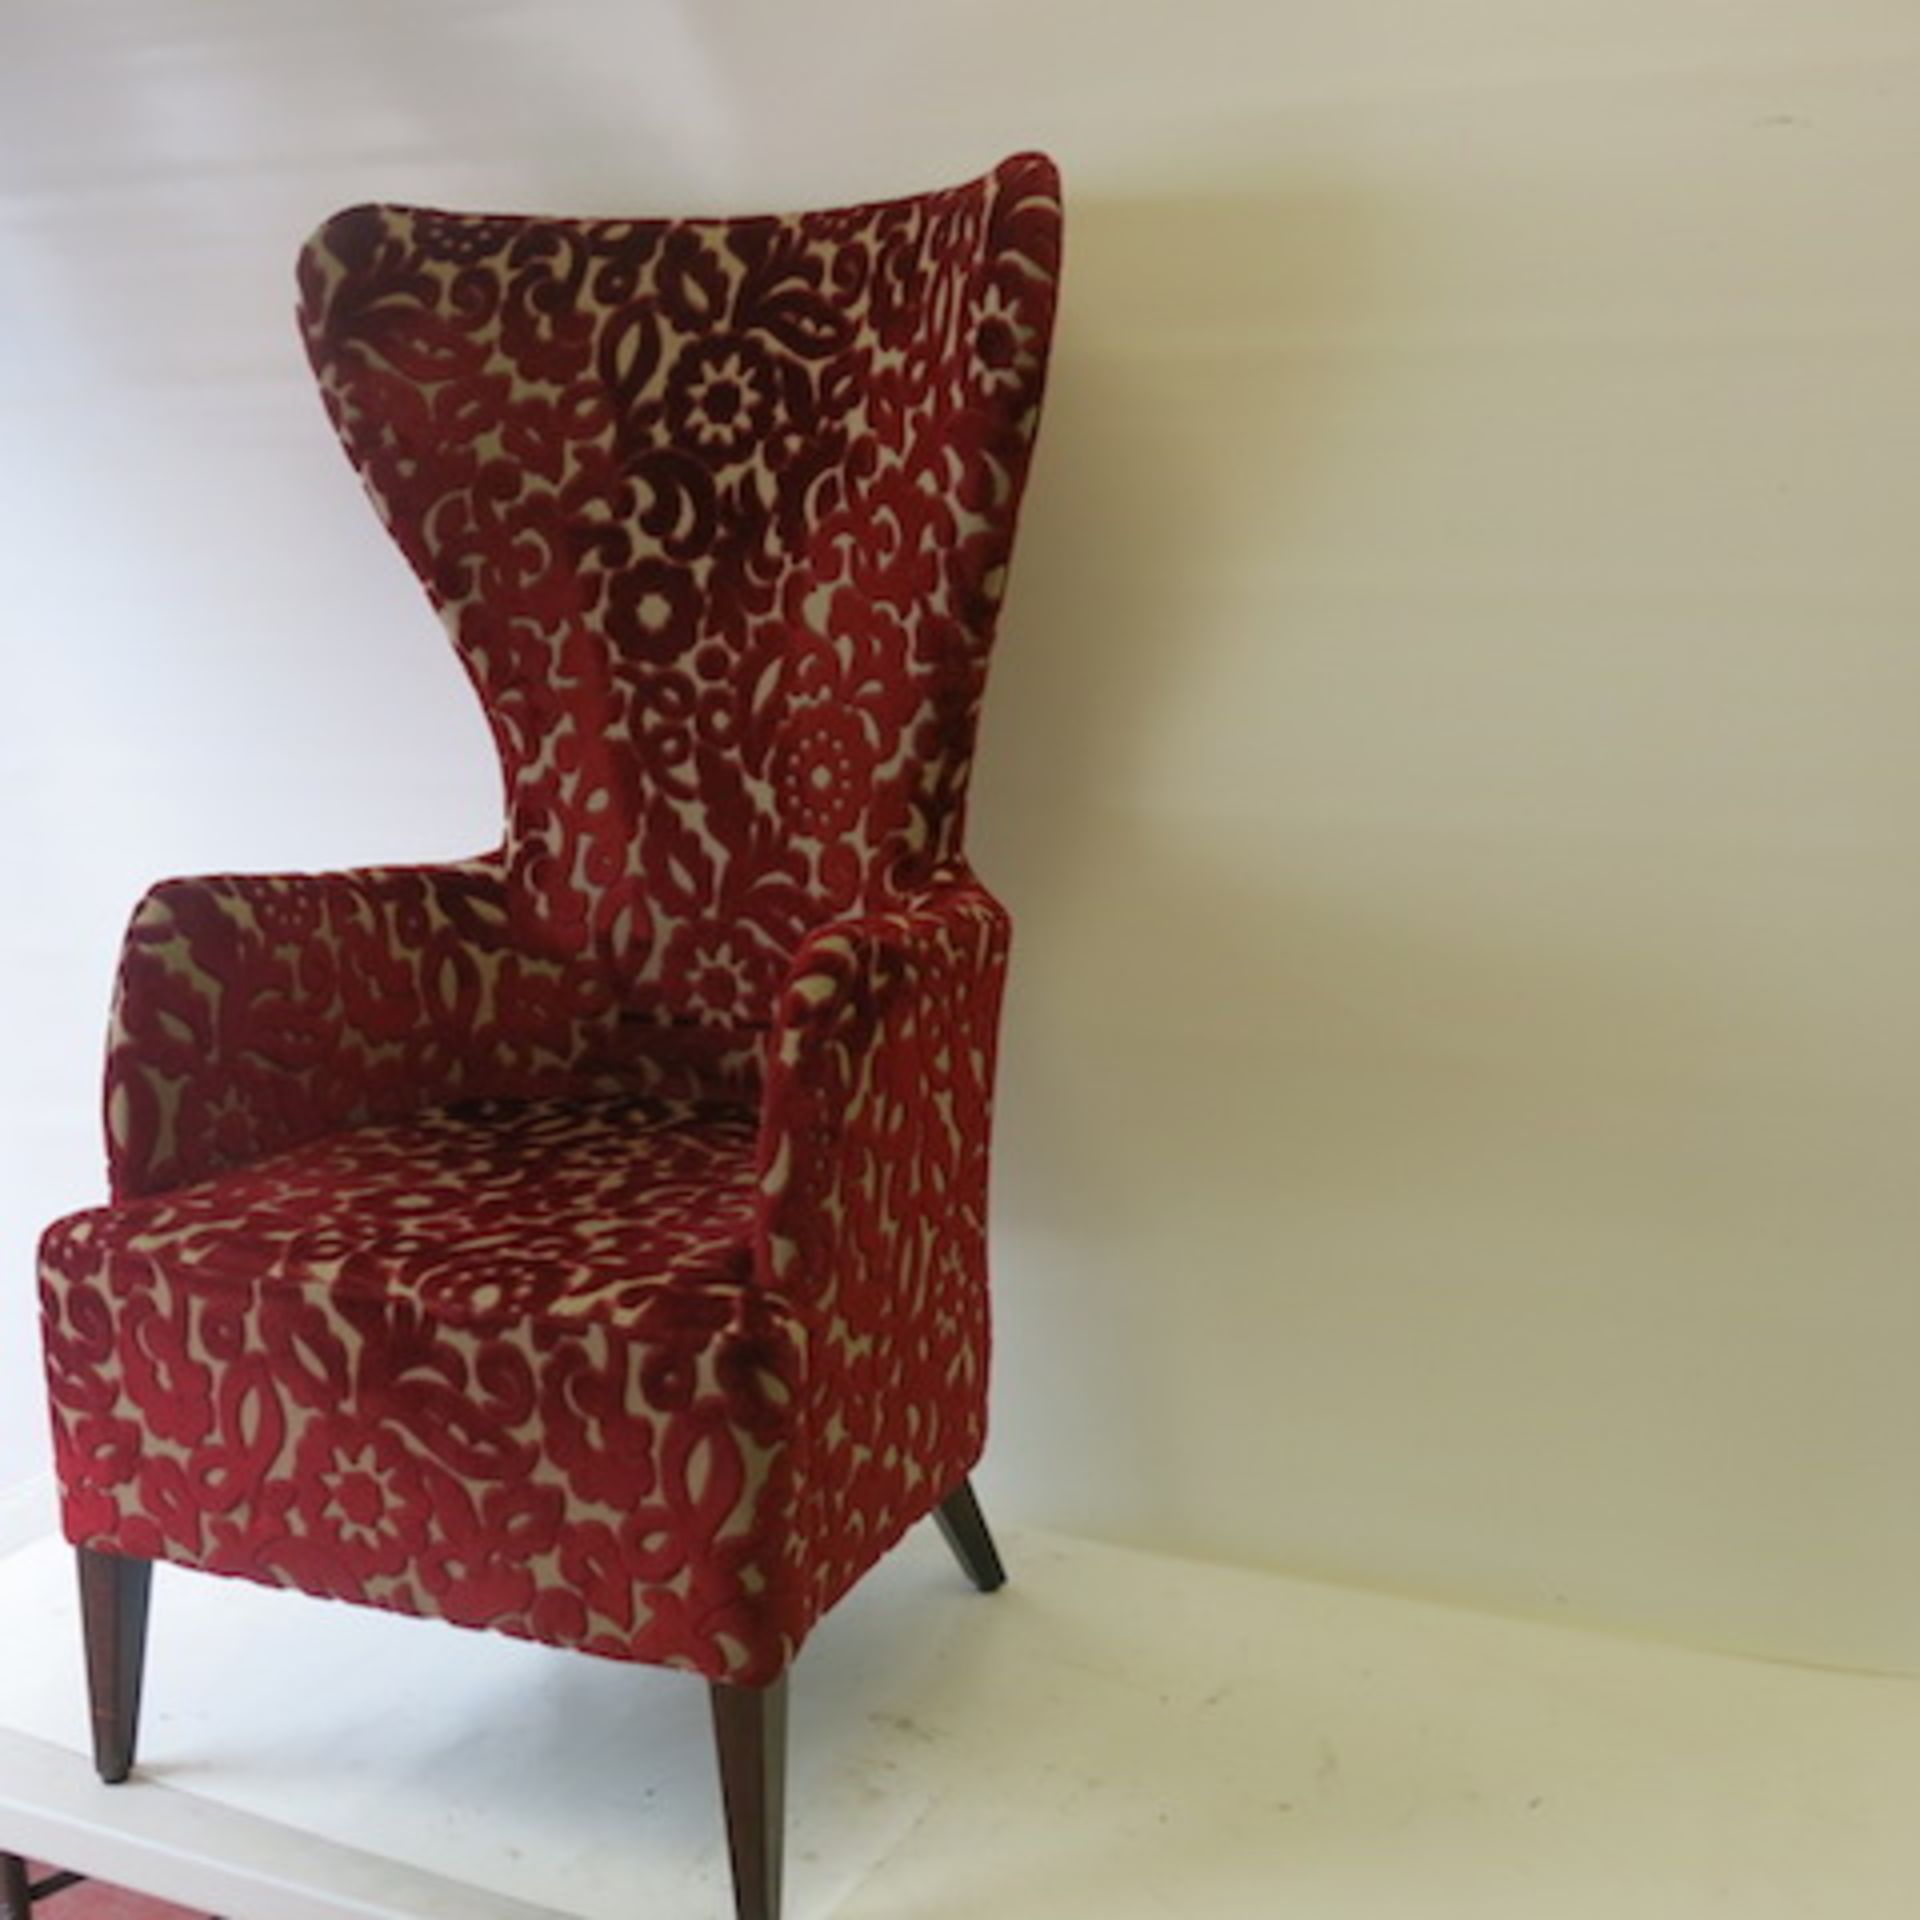 A High Back Wing Armchair with Crushed Velour Pattern in Deep Red & Cream, appears in good condition - Image 2 of 6